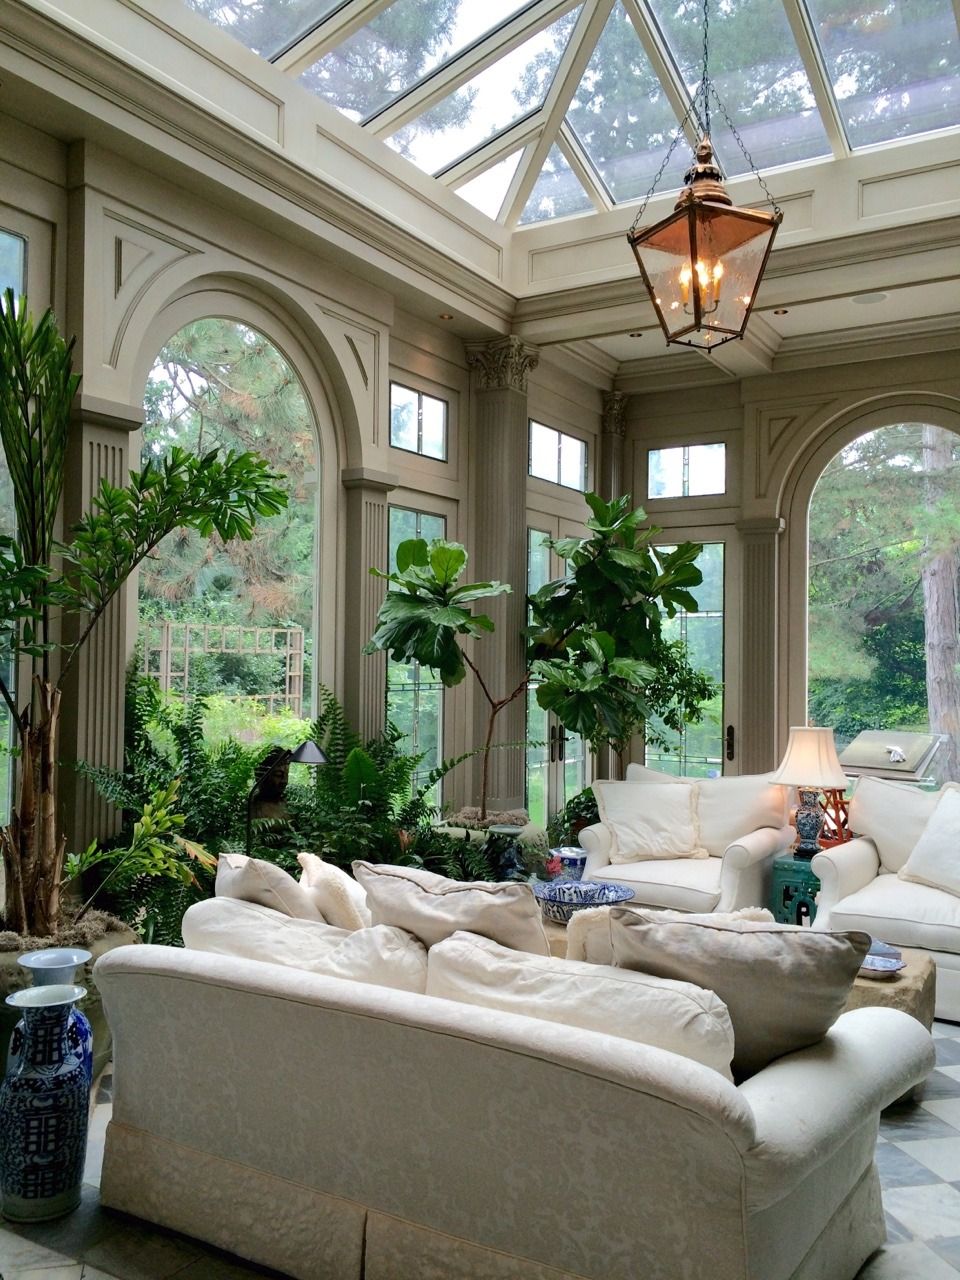 Decoration In The Conservatory Transforming Your Conservatory into a Stylish Retreat with Creative Design Ideas